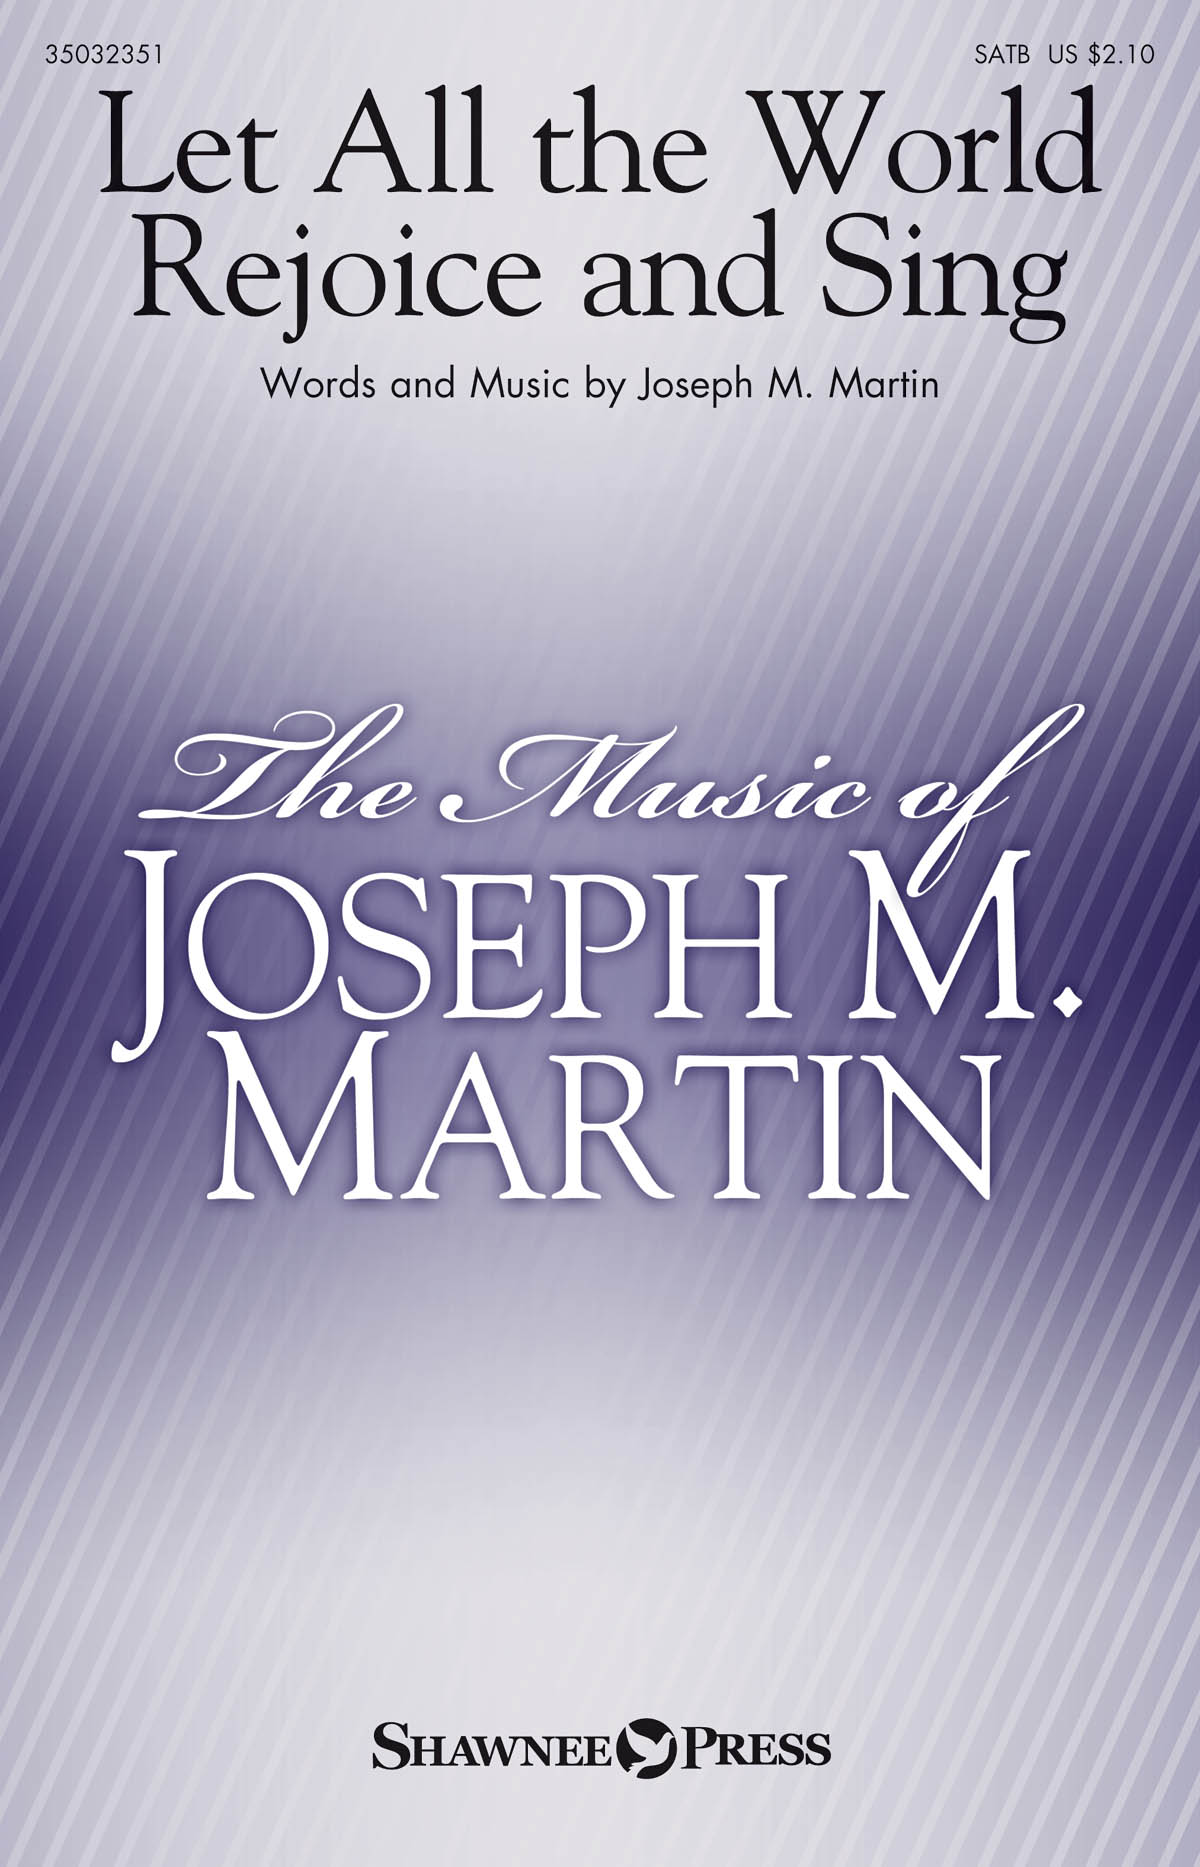 Joseph M. Martin: Let All the World Rejoice and Sing: SATB: Vocal Score